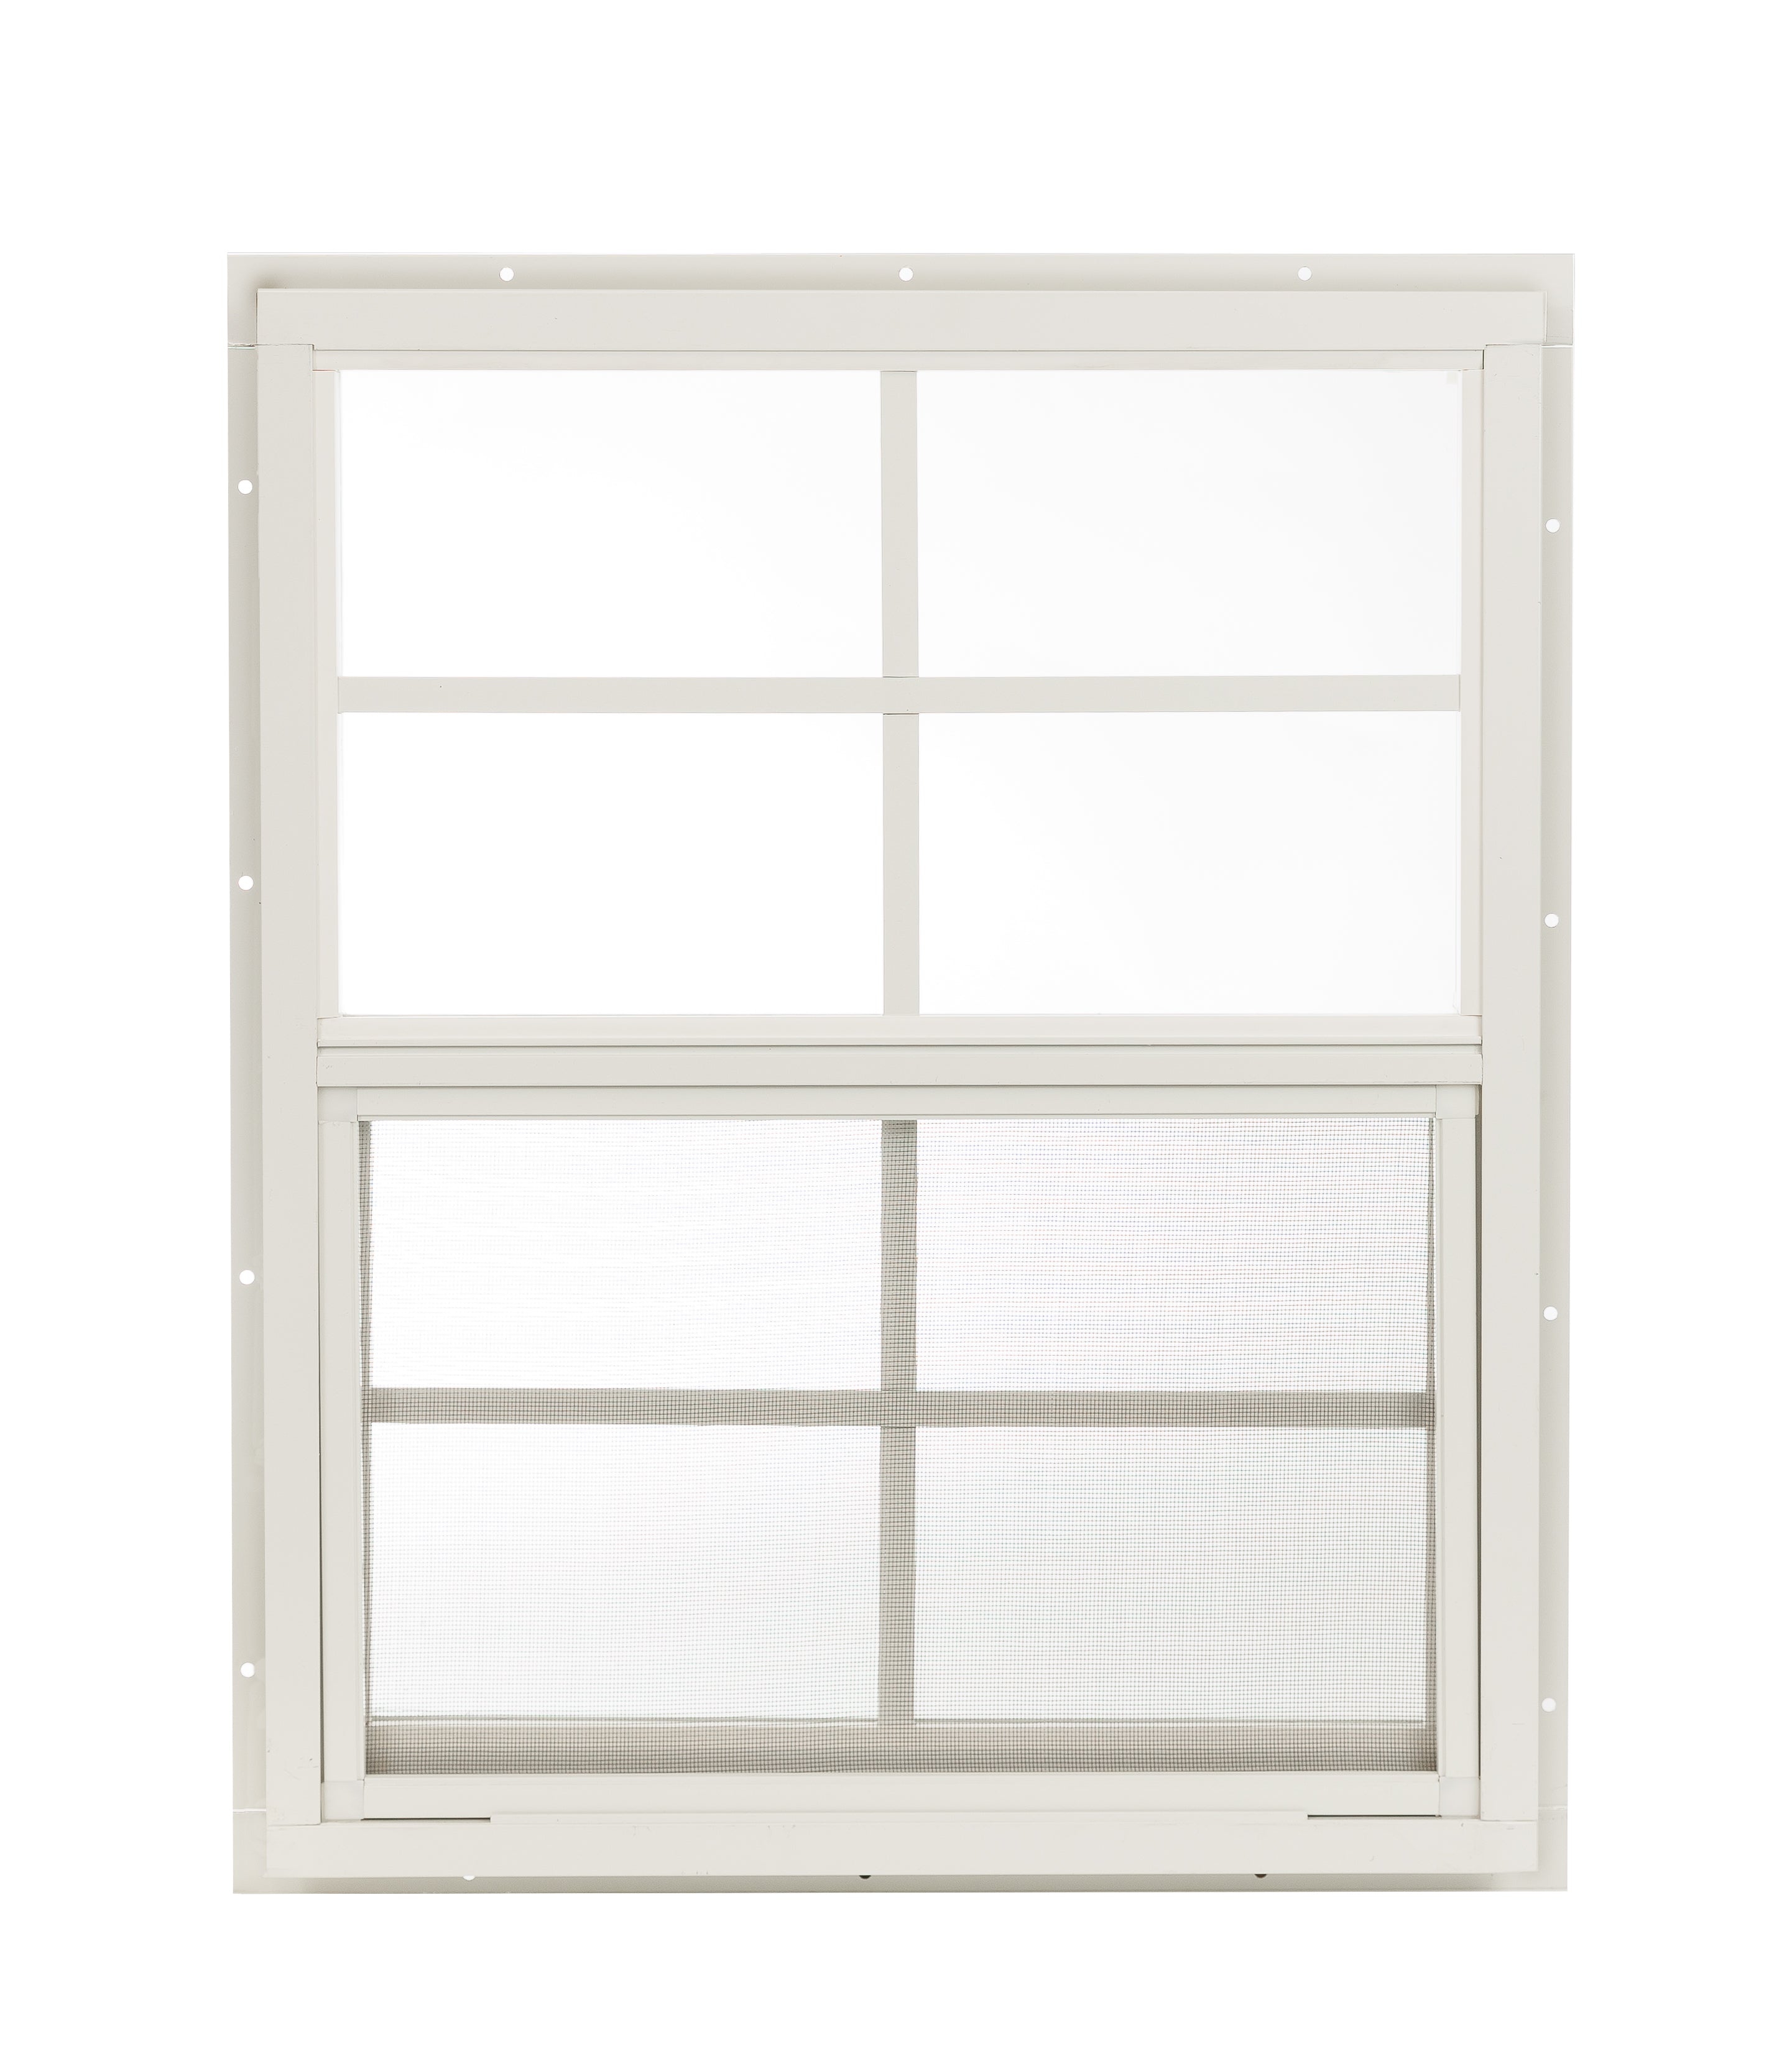 18" W x 23" H Single Hung J-Lap Mount White Window for Sheds, Playhouses, and MORE